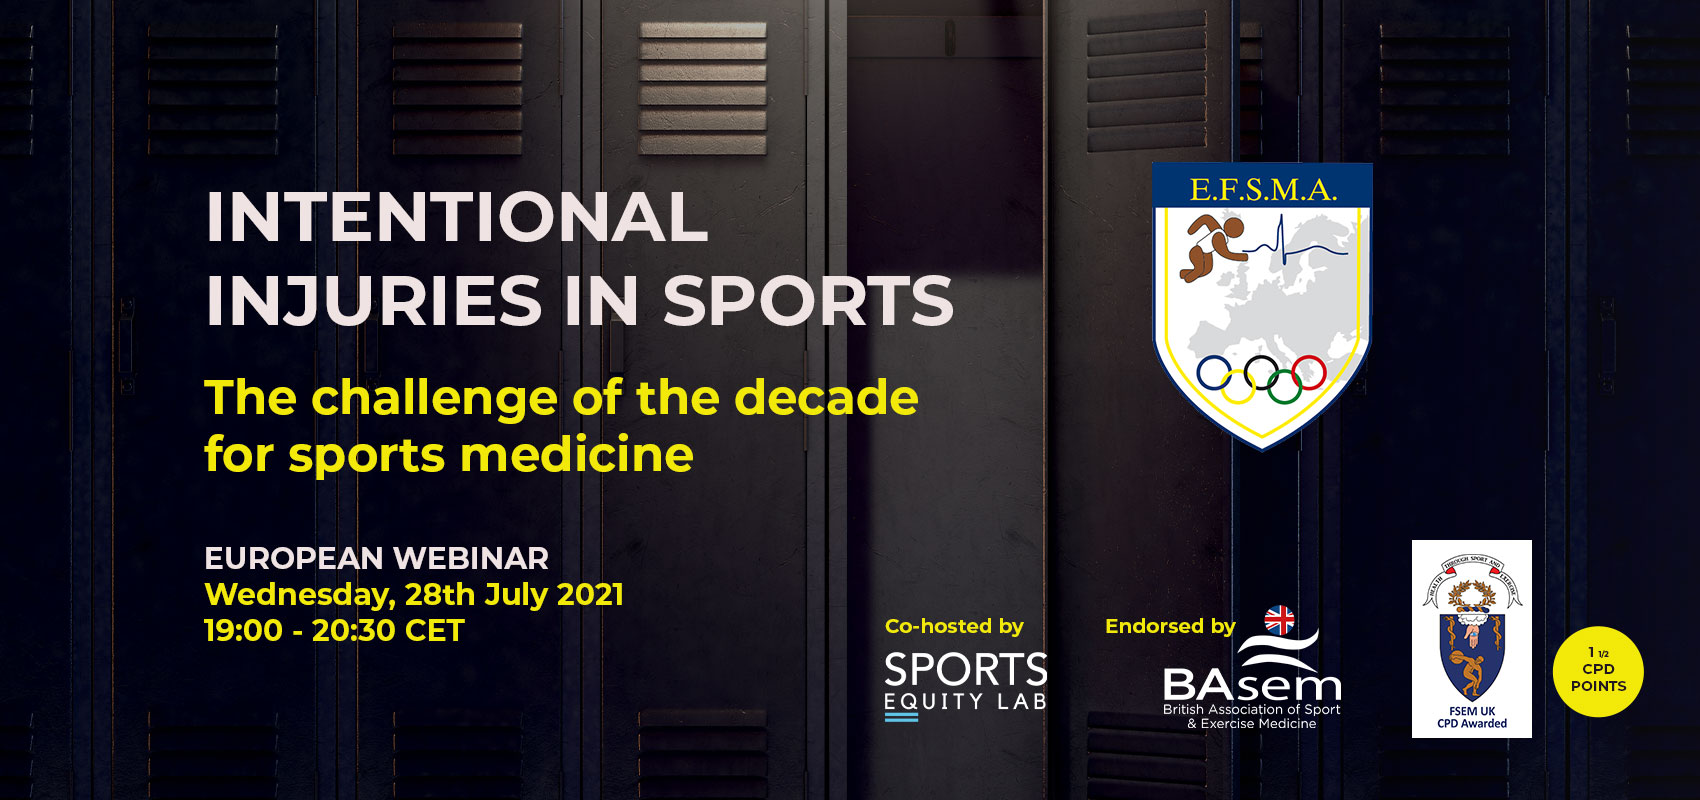 Intentional injuries in sports — The challenge of the decade for sports medicine